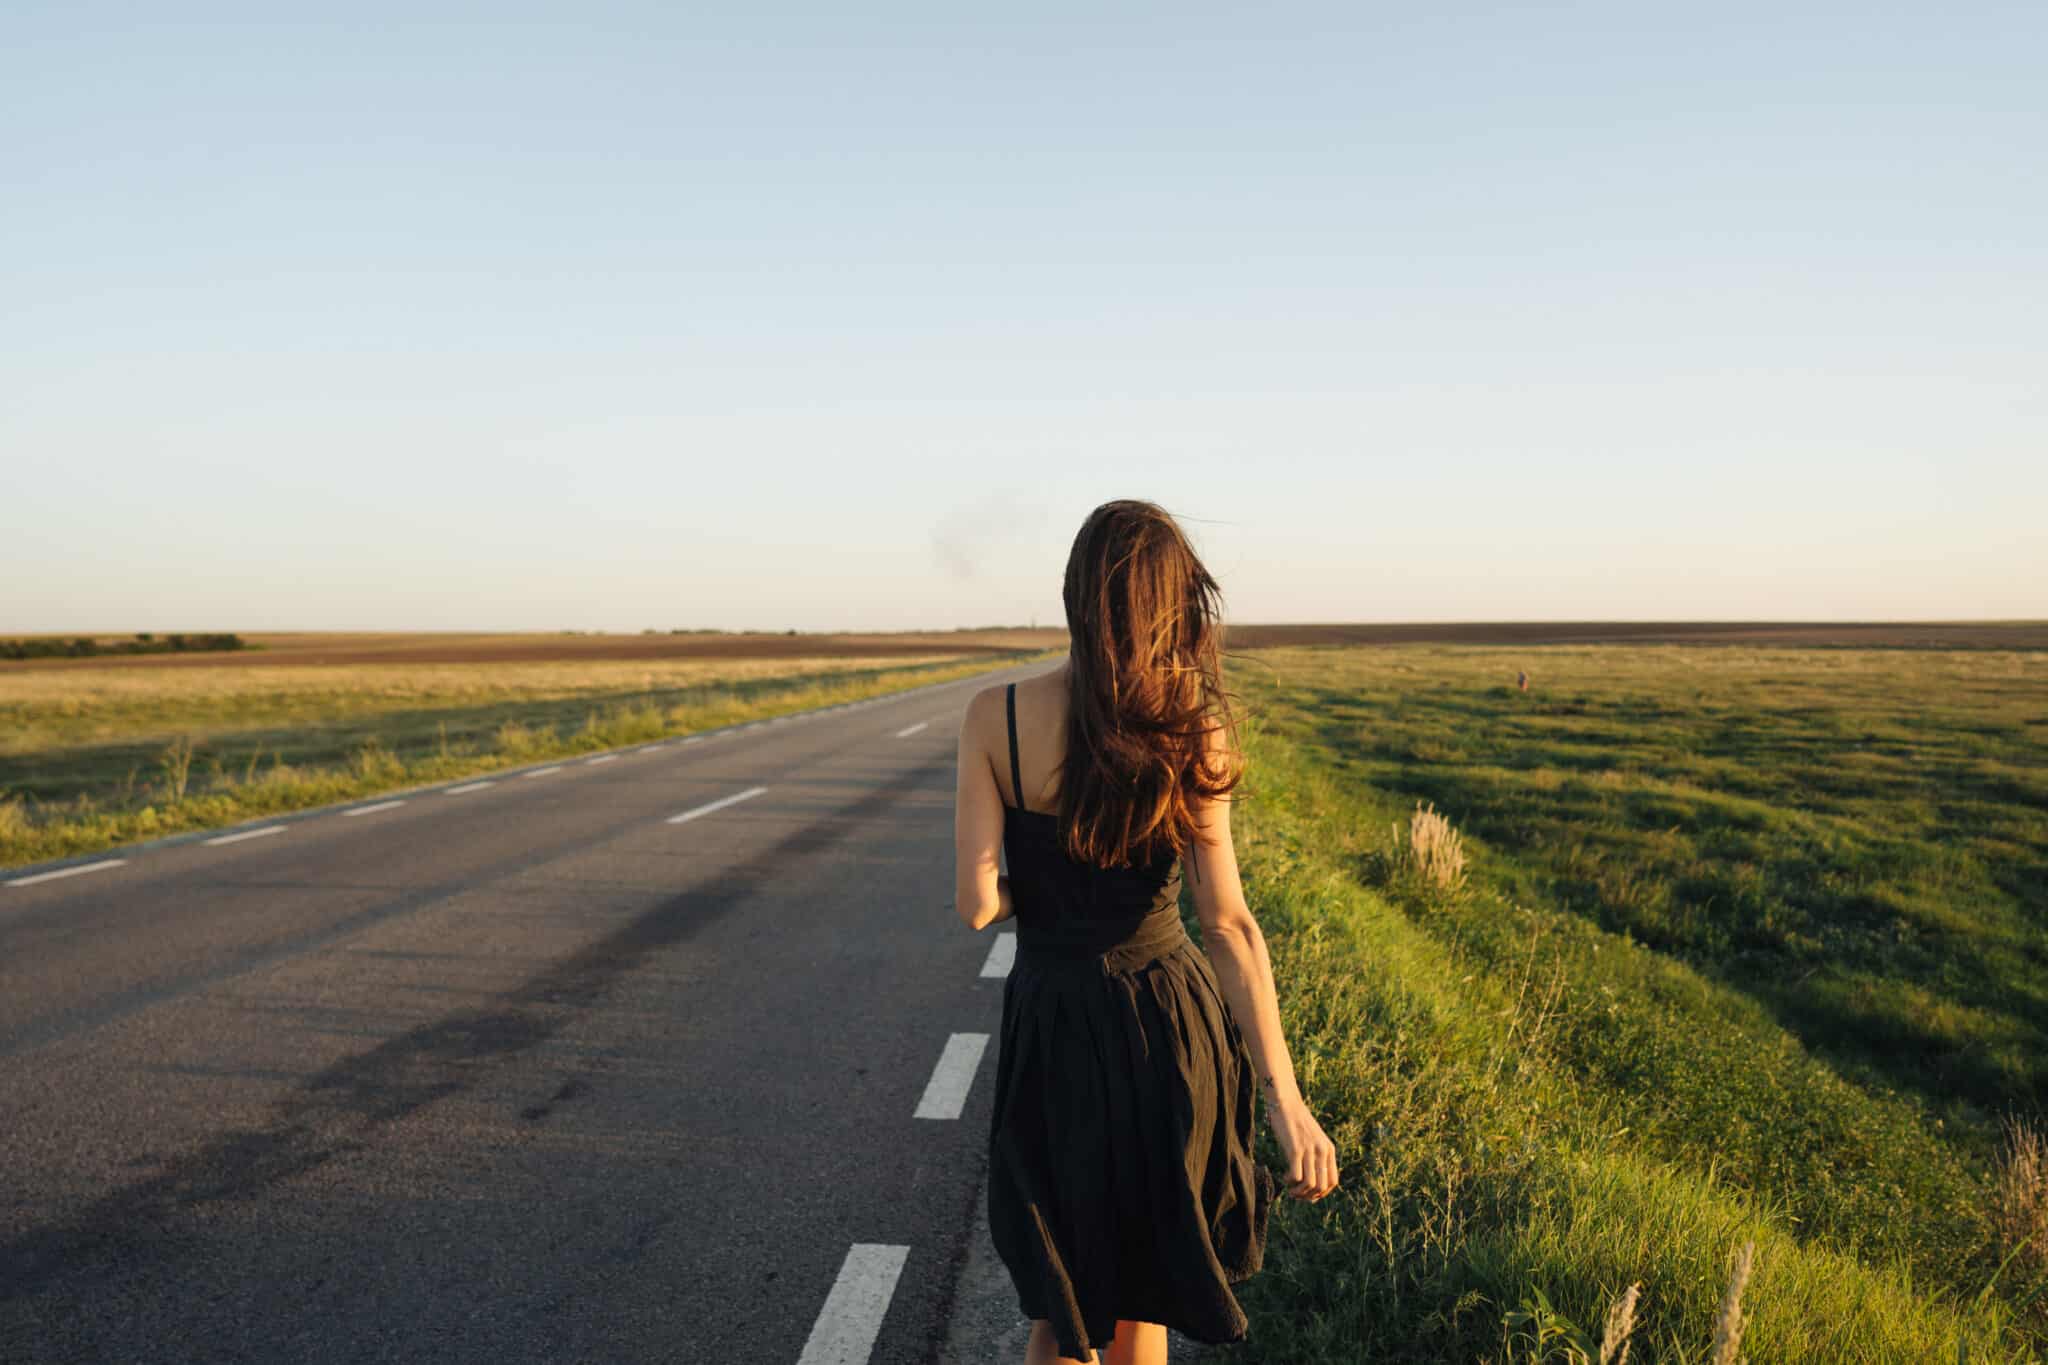 A young girl is walking along the road.